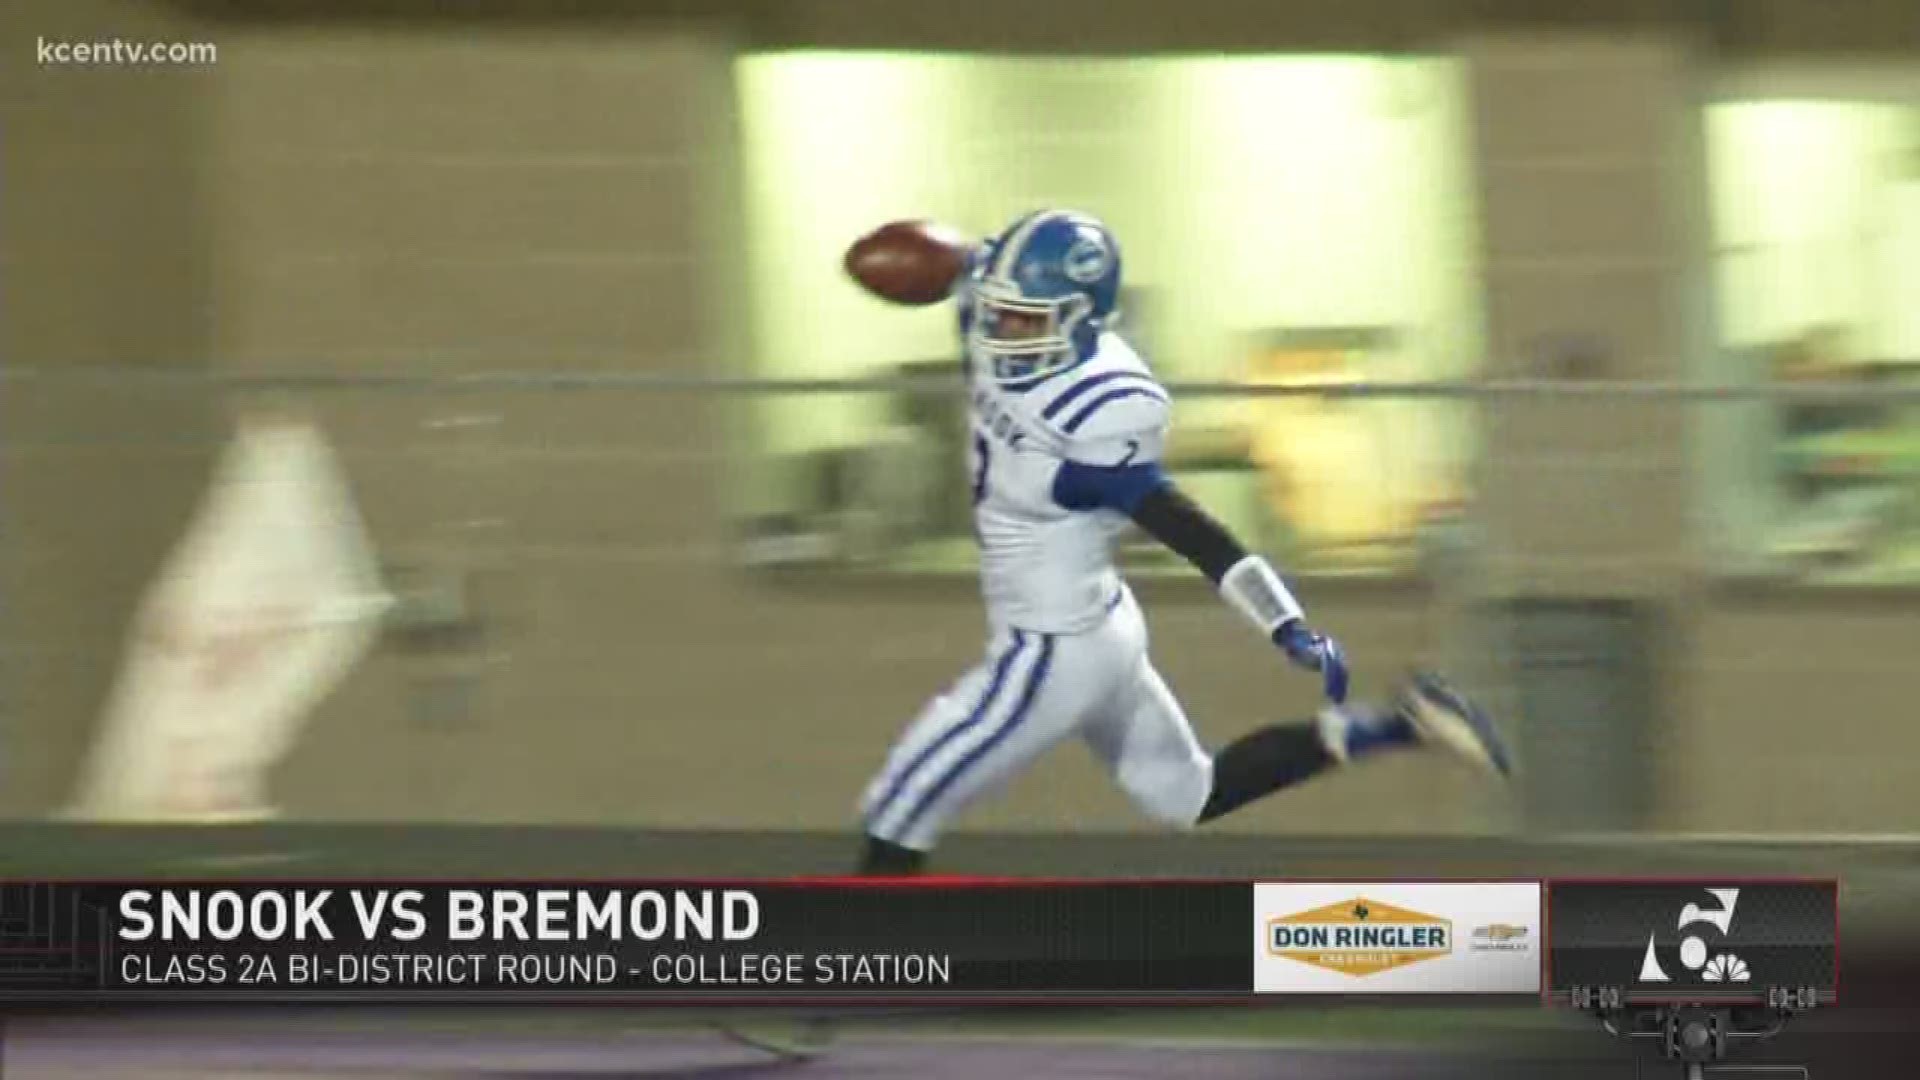 Snook had more firepower in this shootout as they secure a 36-34 win over Bremond.